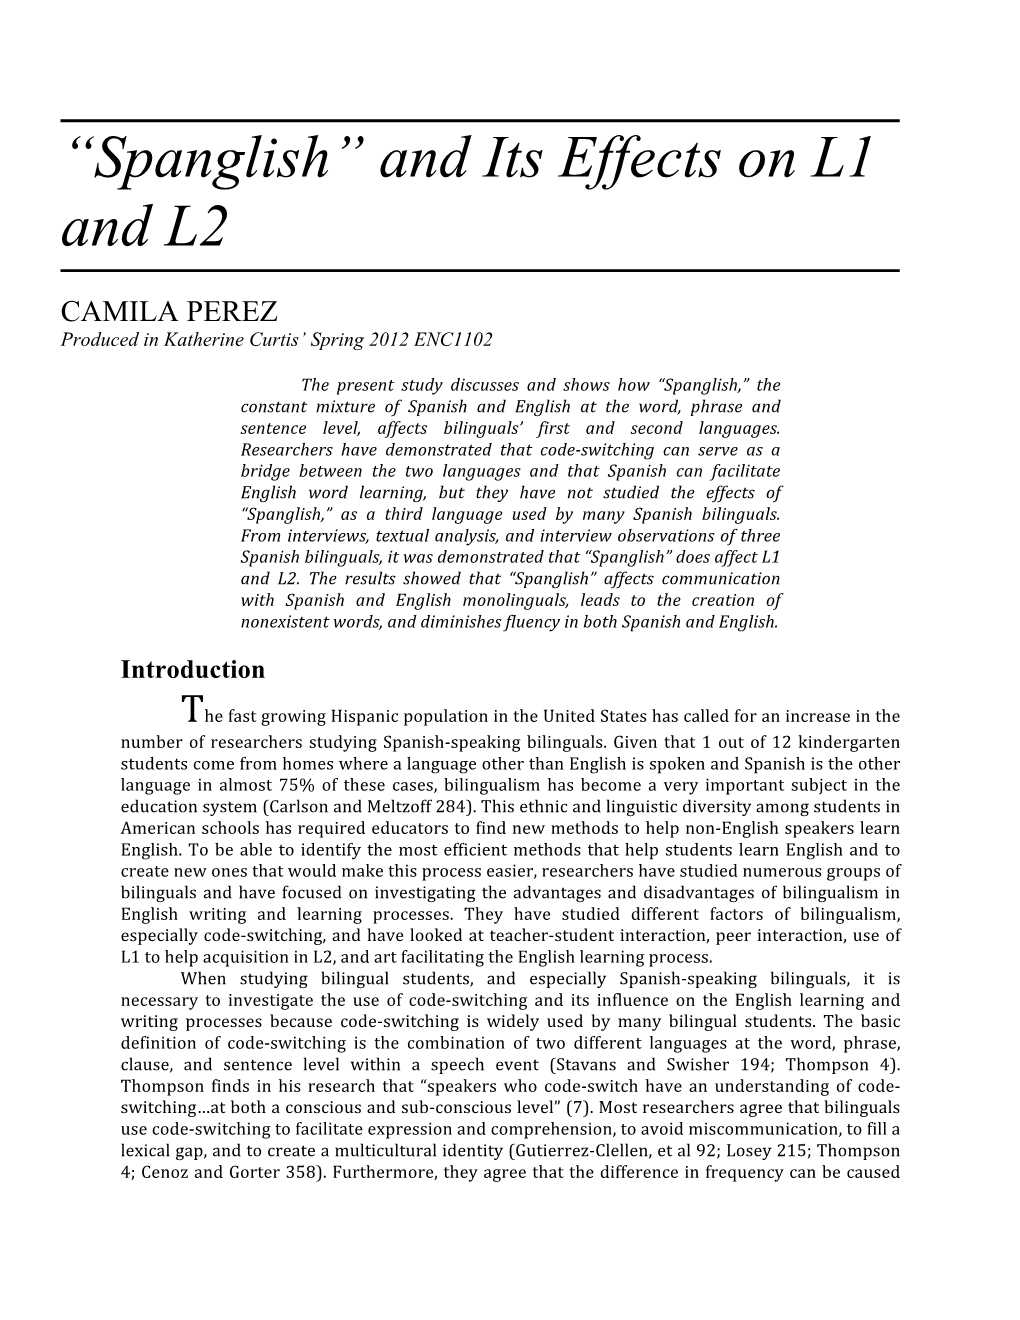 Spanglish” and Its Effects on L1 and L2